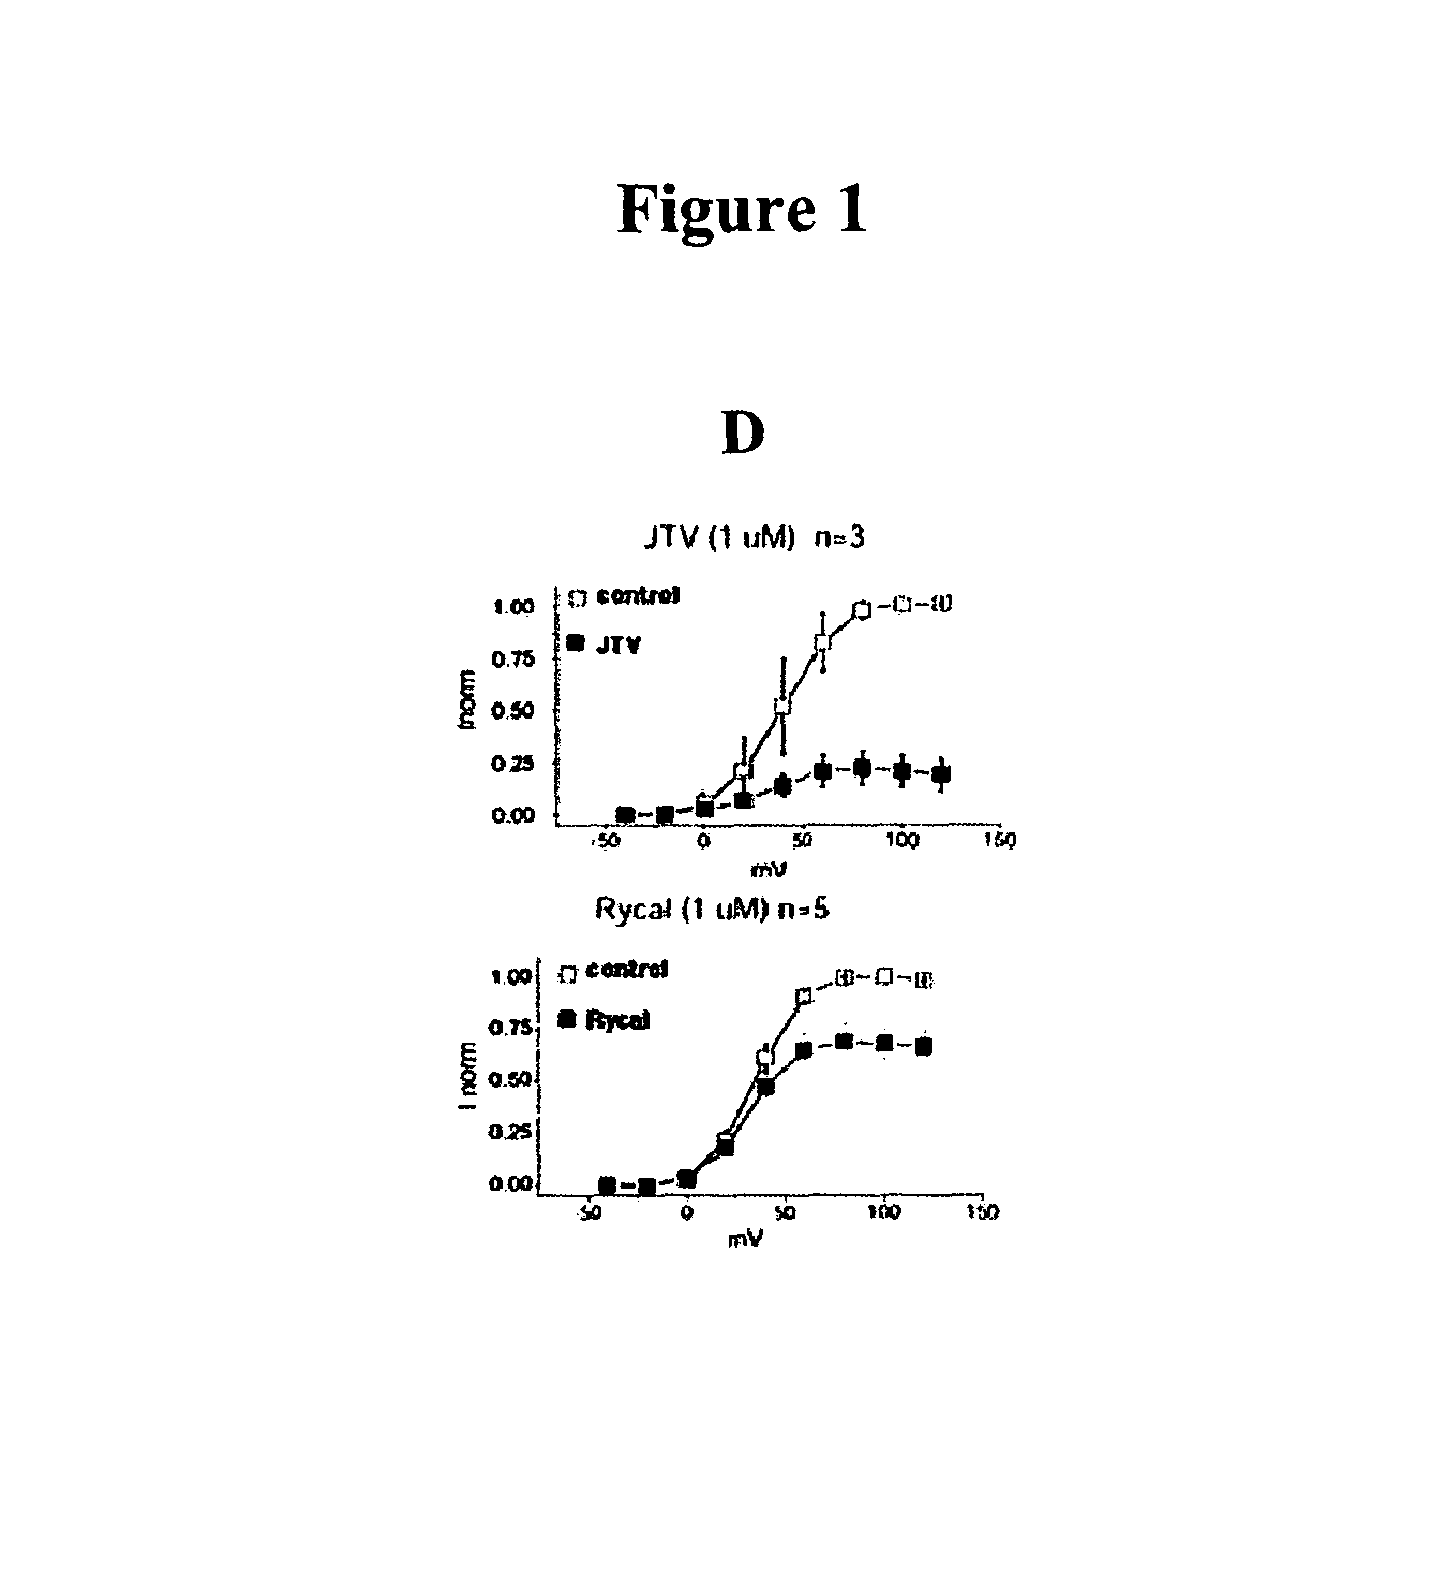 Agents for preventing and treating disorders involving modulation of the RyR receptors